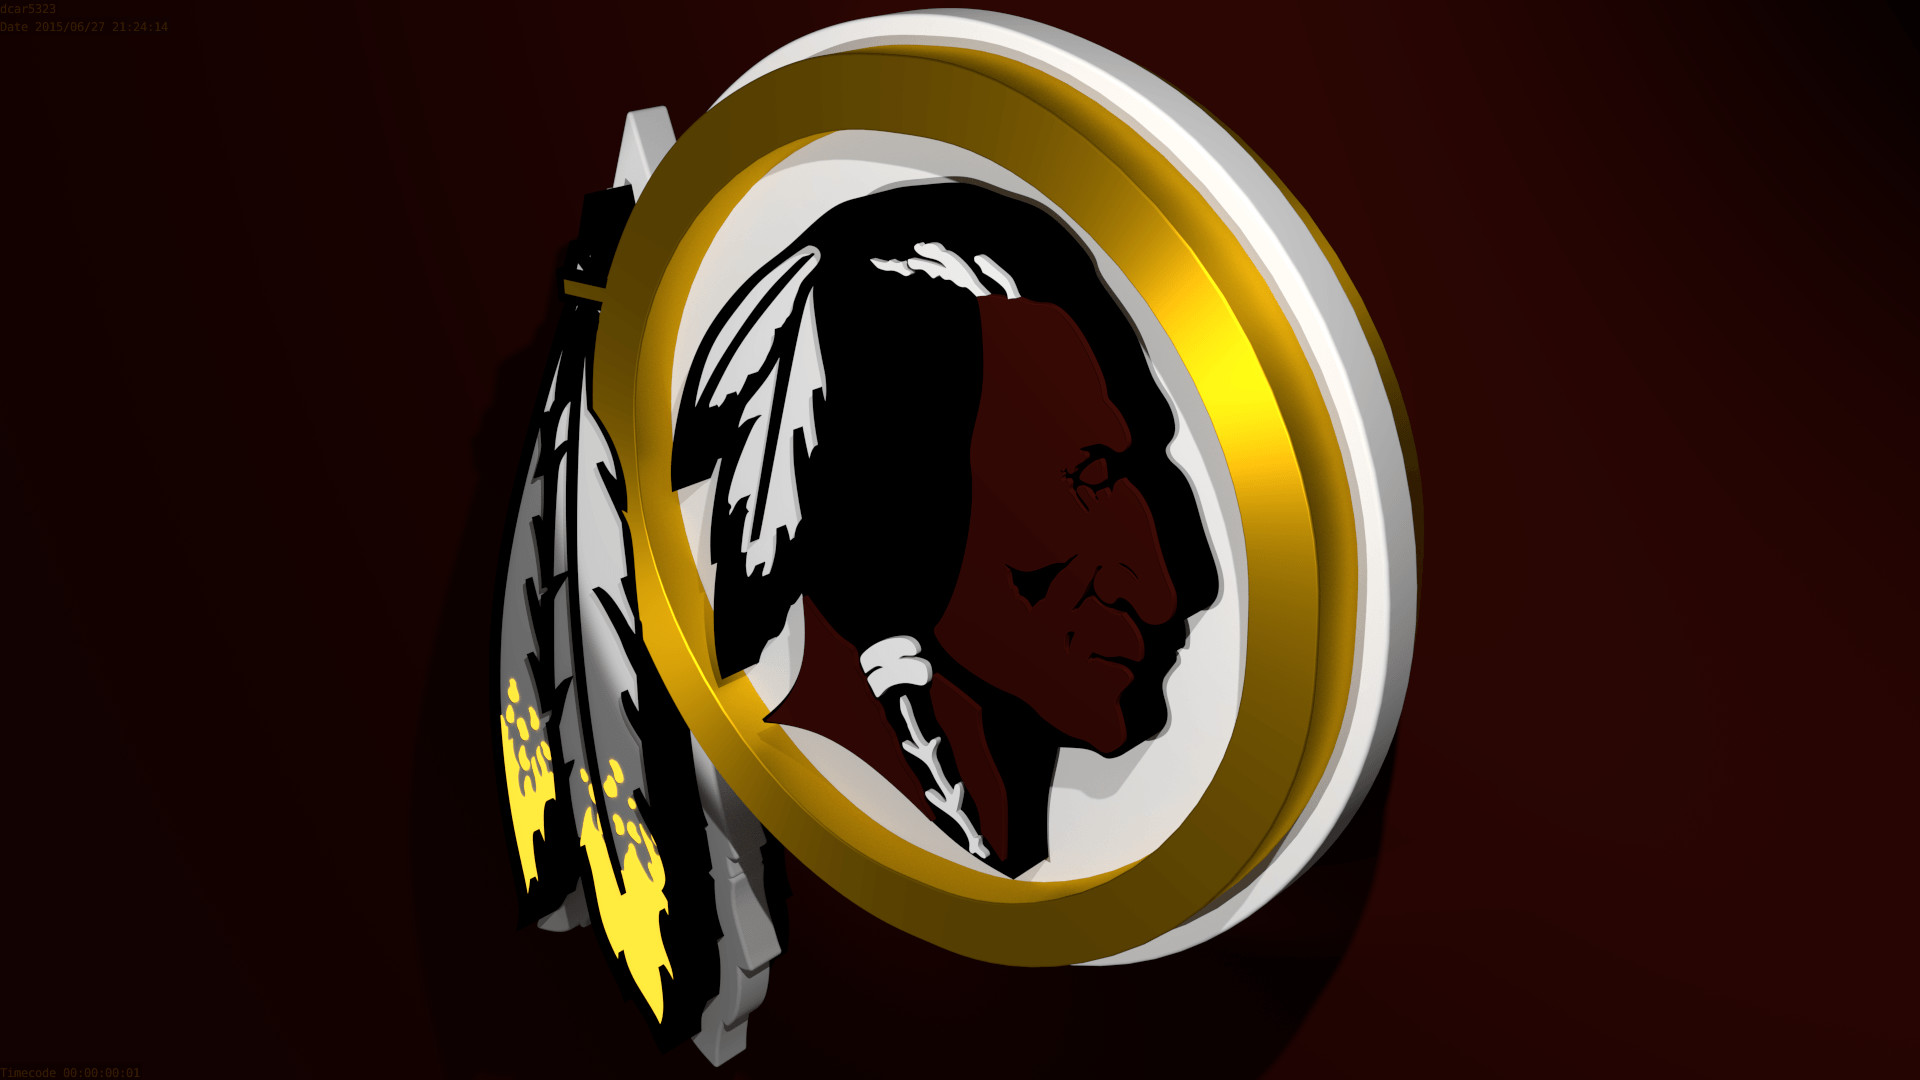 1920x1080 Redskins Wallpapers 2016 - Wallpaper Cave